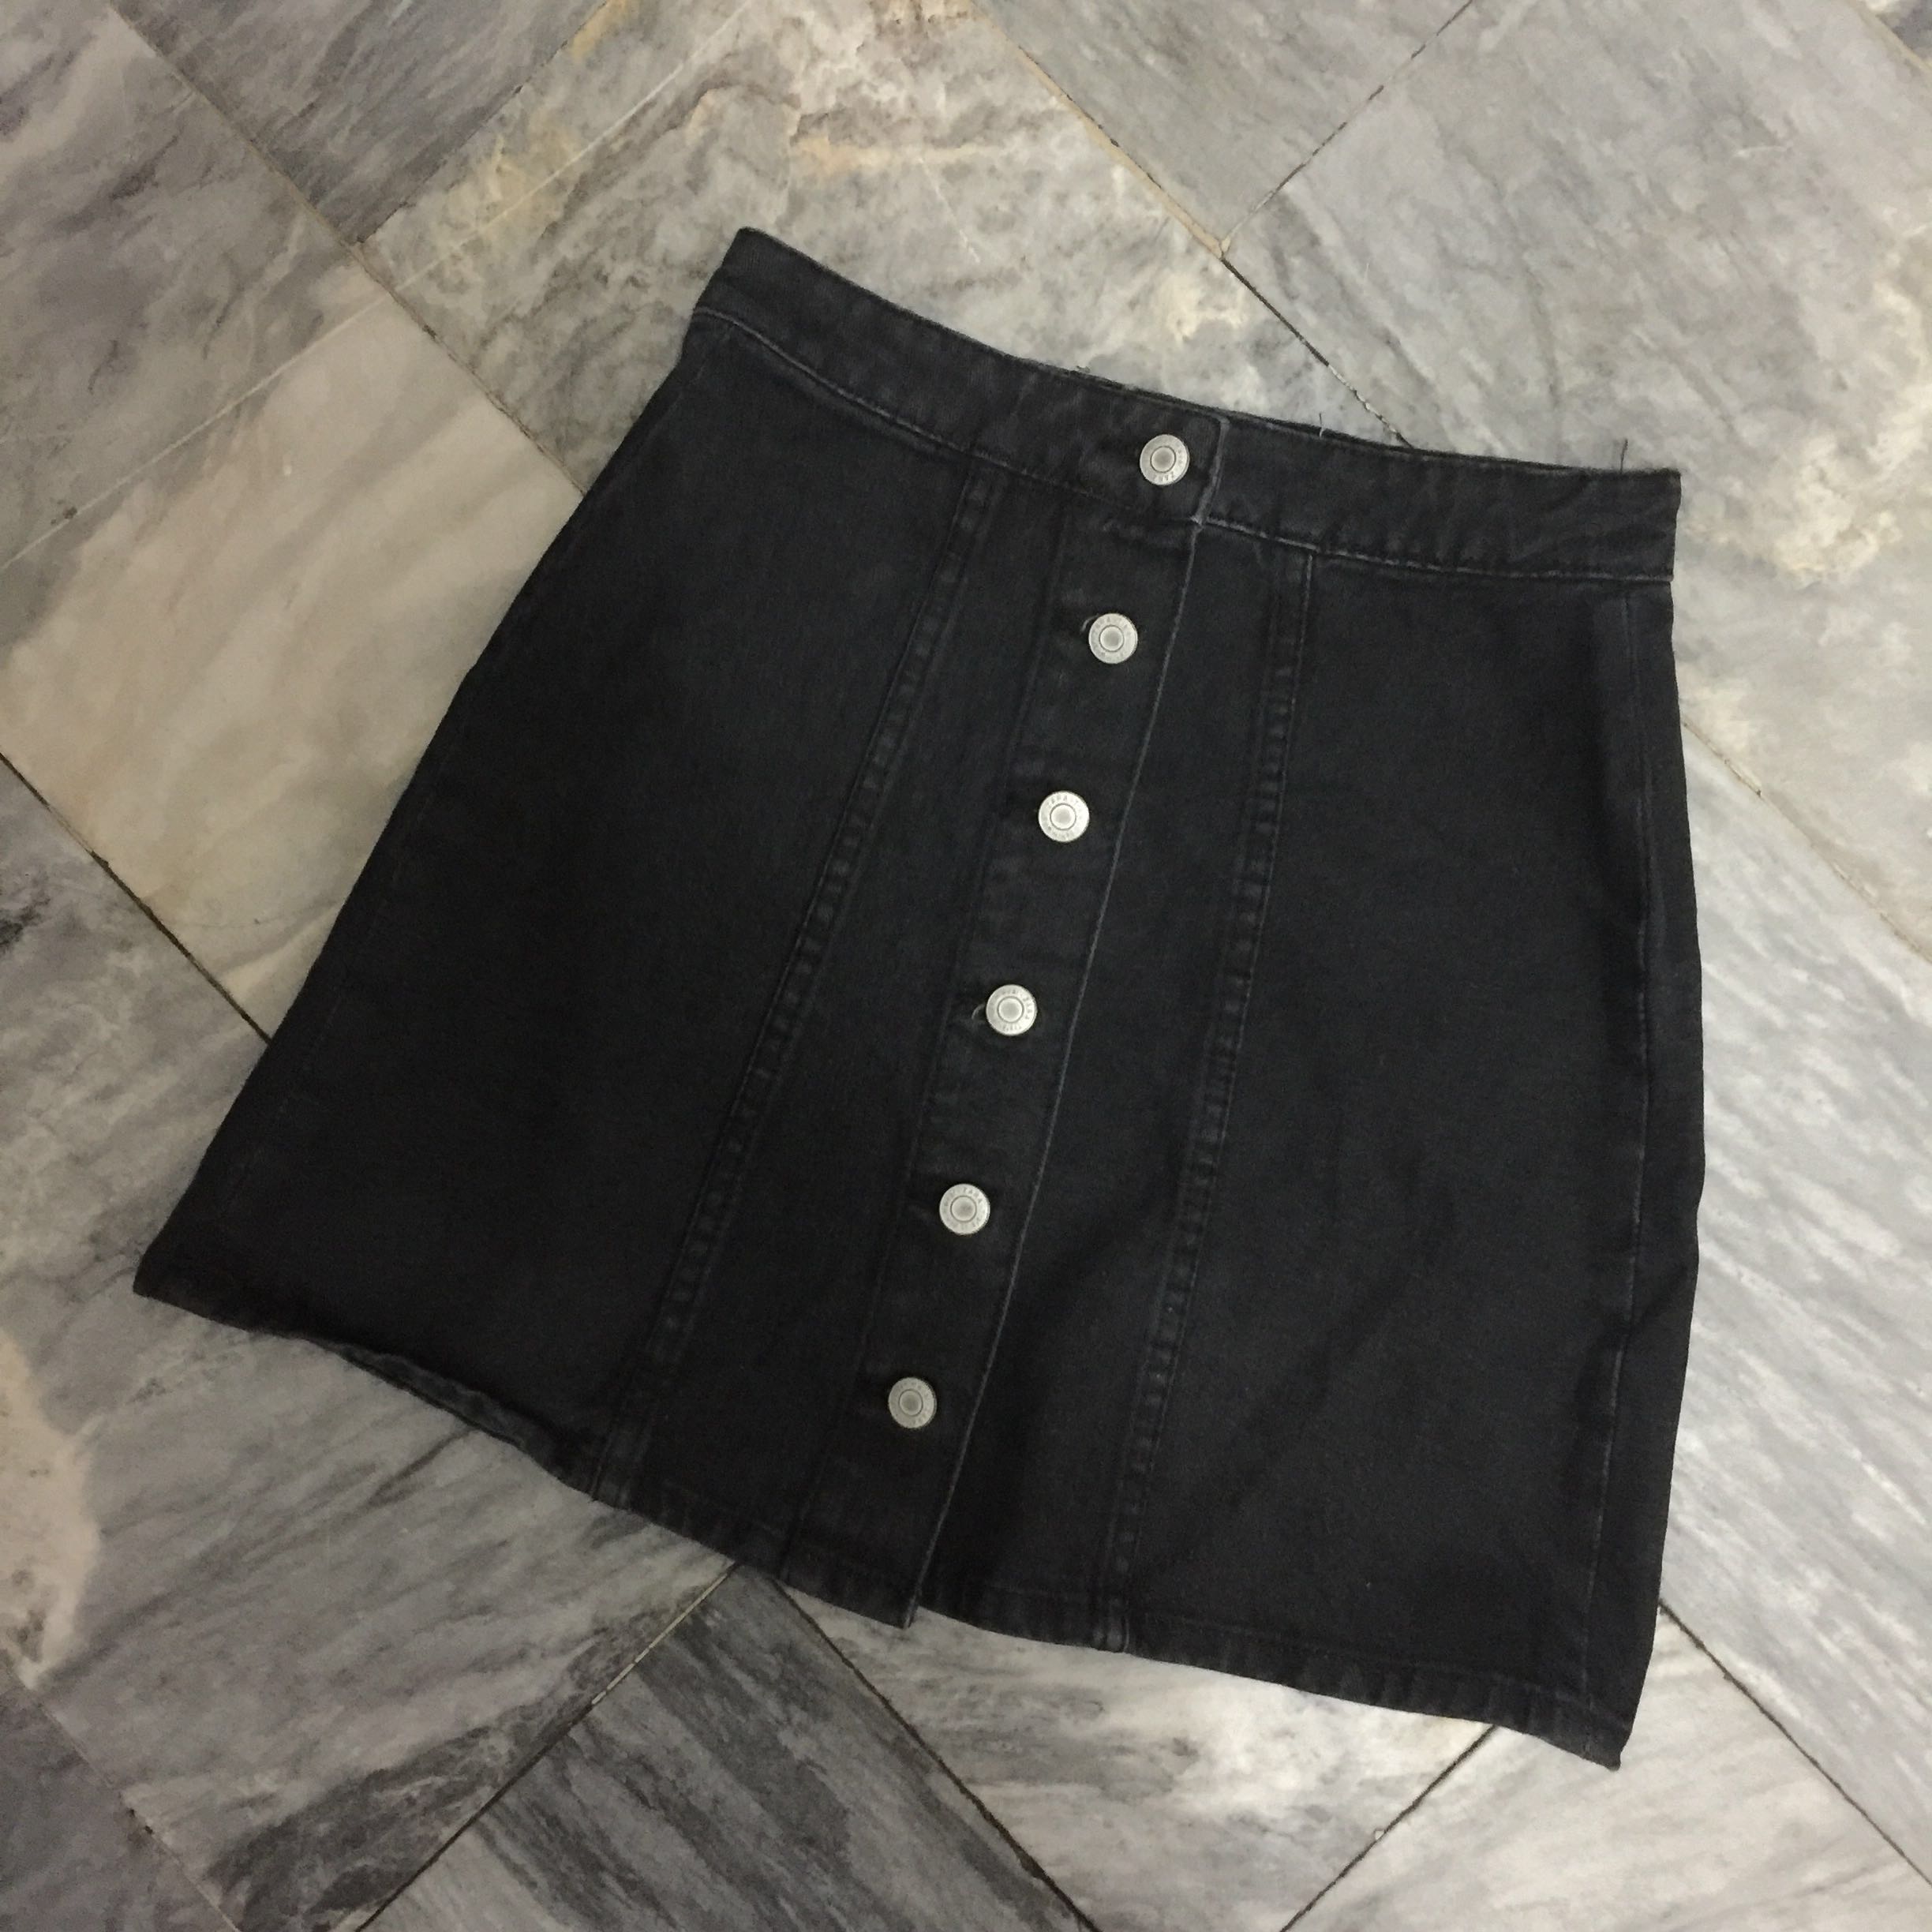 black denim skirt with buttons down the front